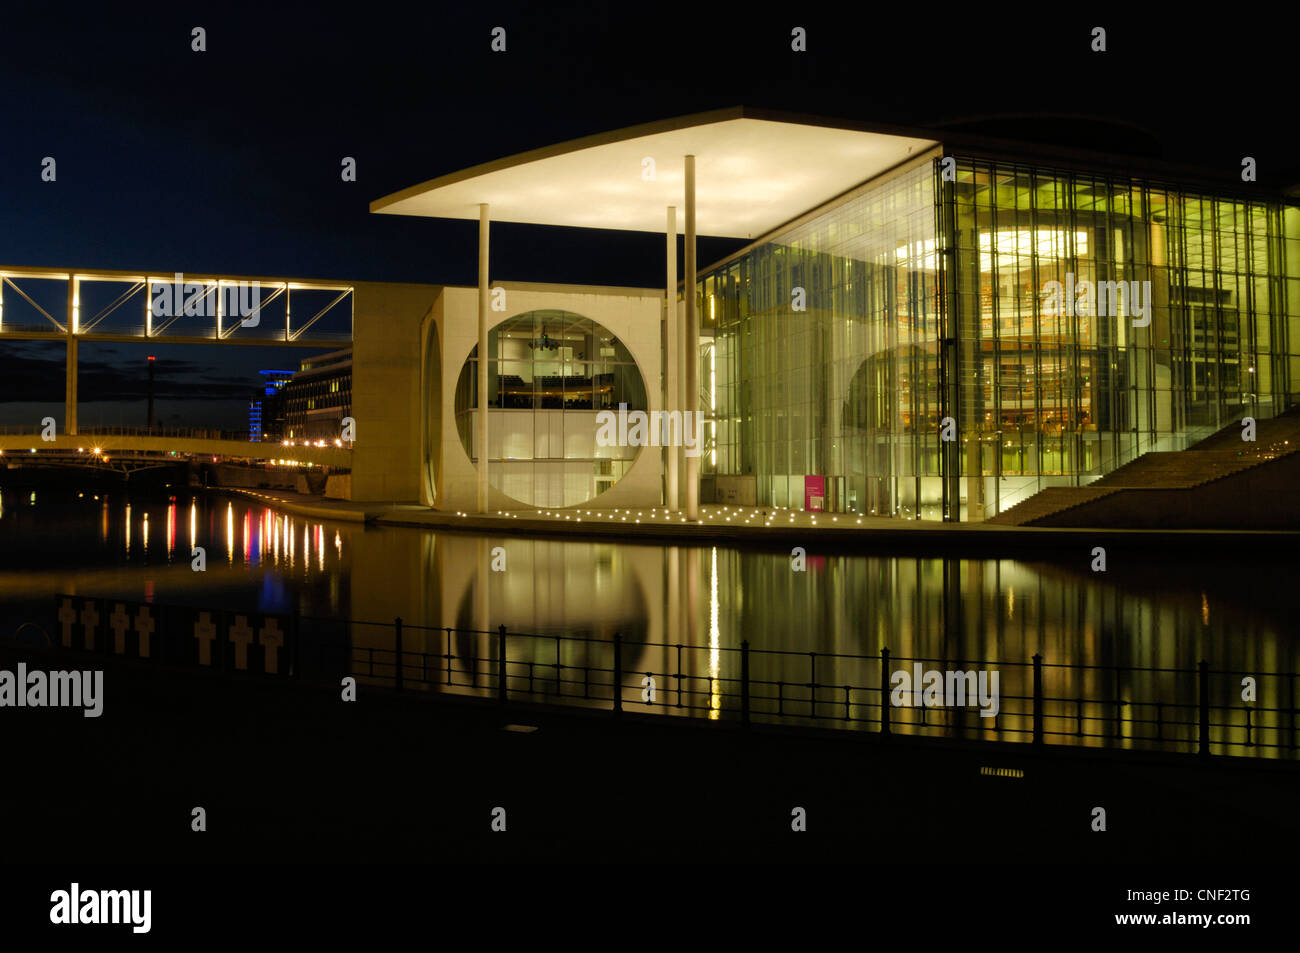 Parliamentary Library of the German Bundestag in the Spreebogen Berlin, known as 'The washing machine building' at night Stock Photo